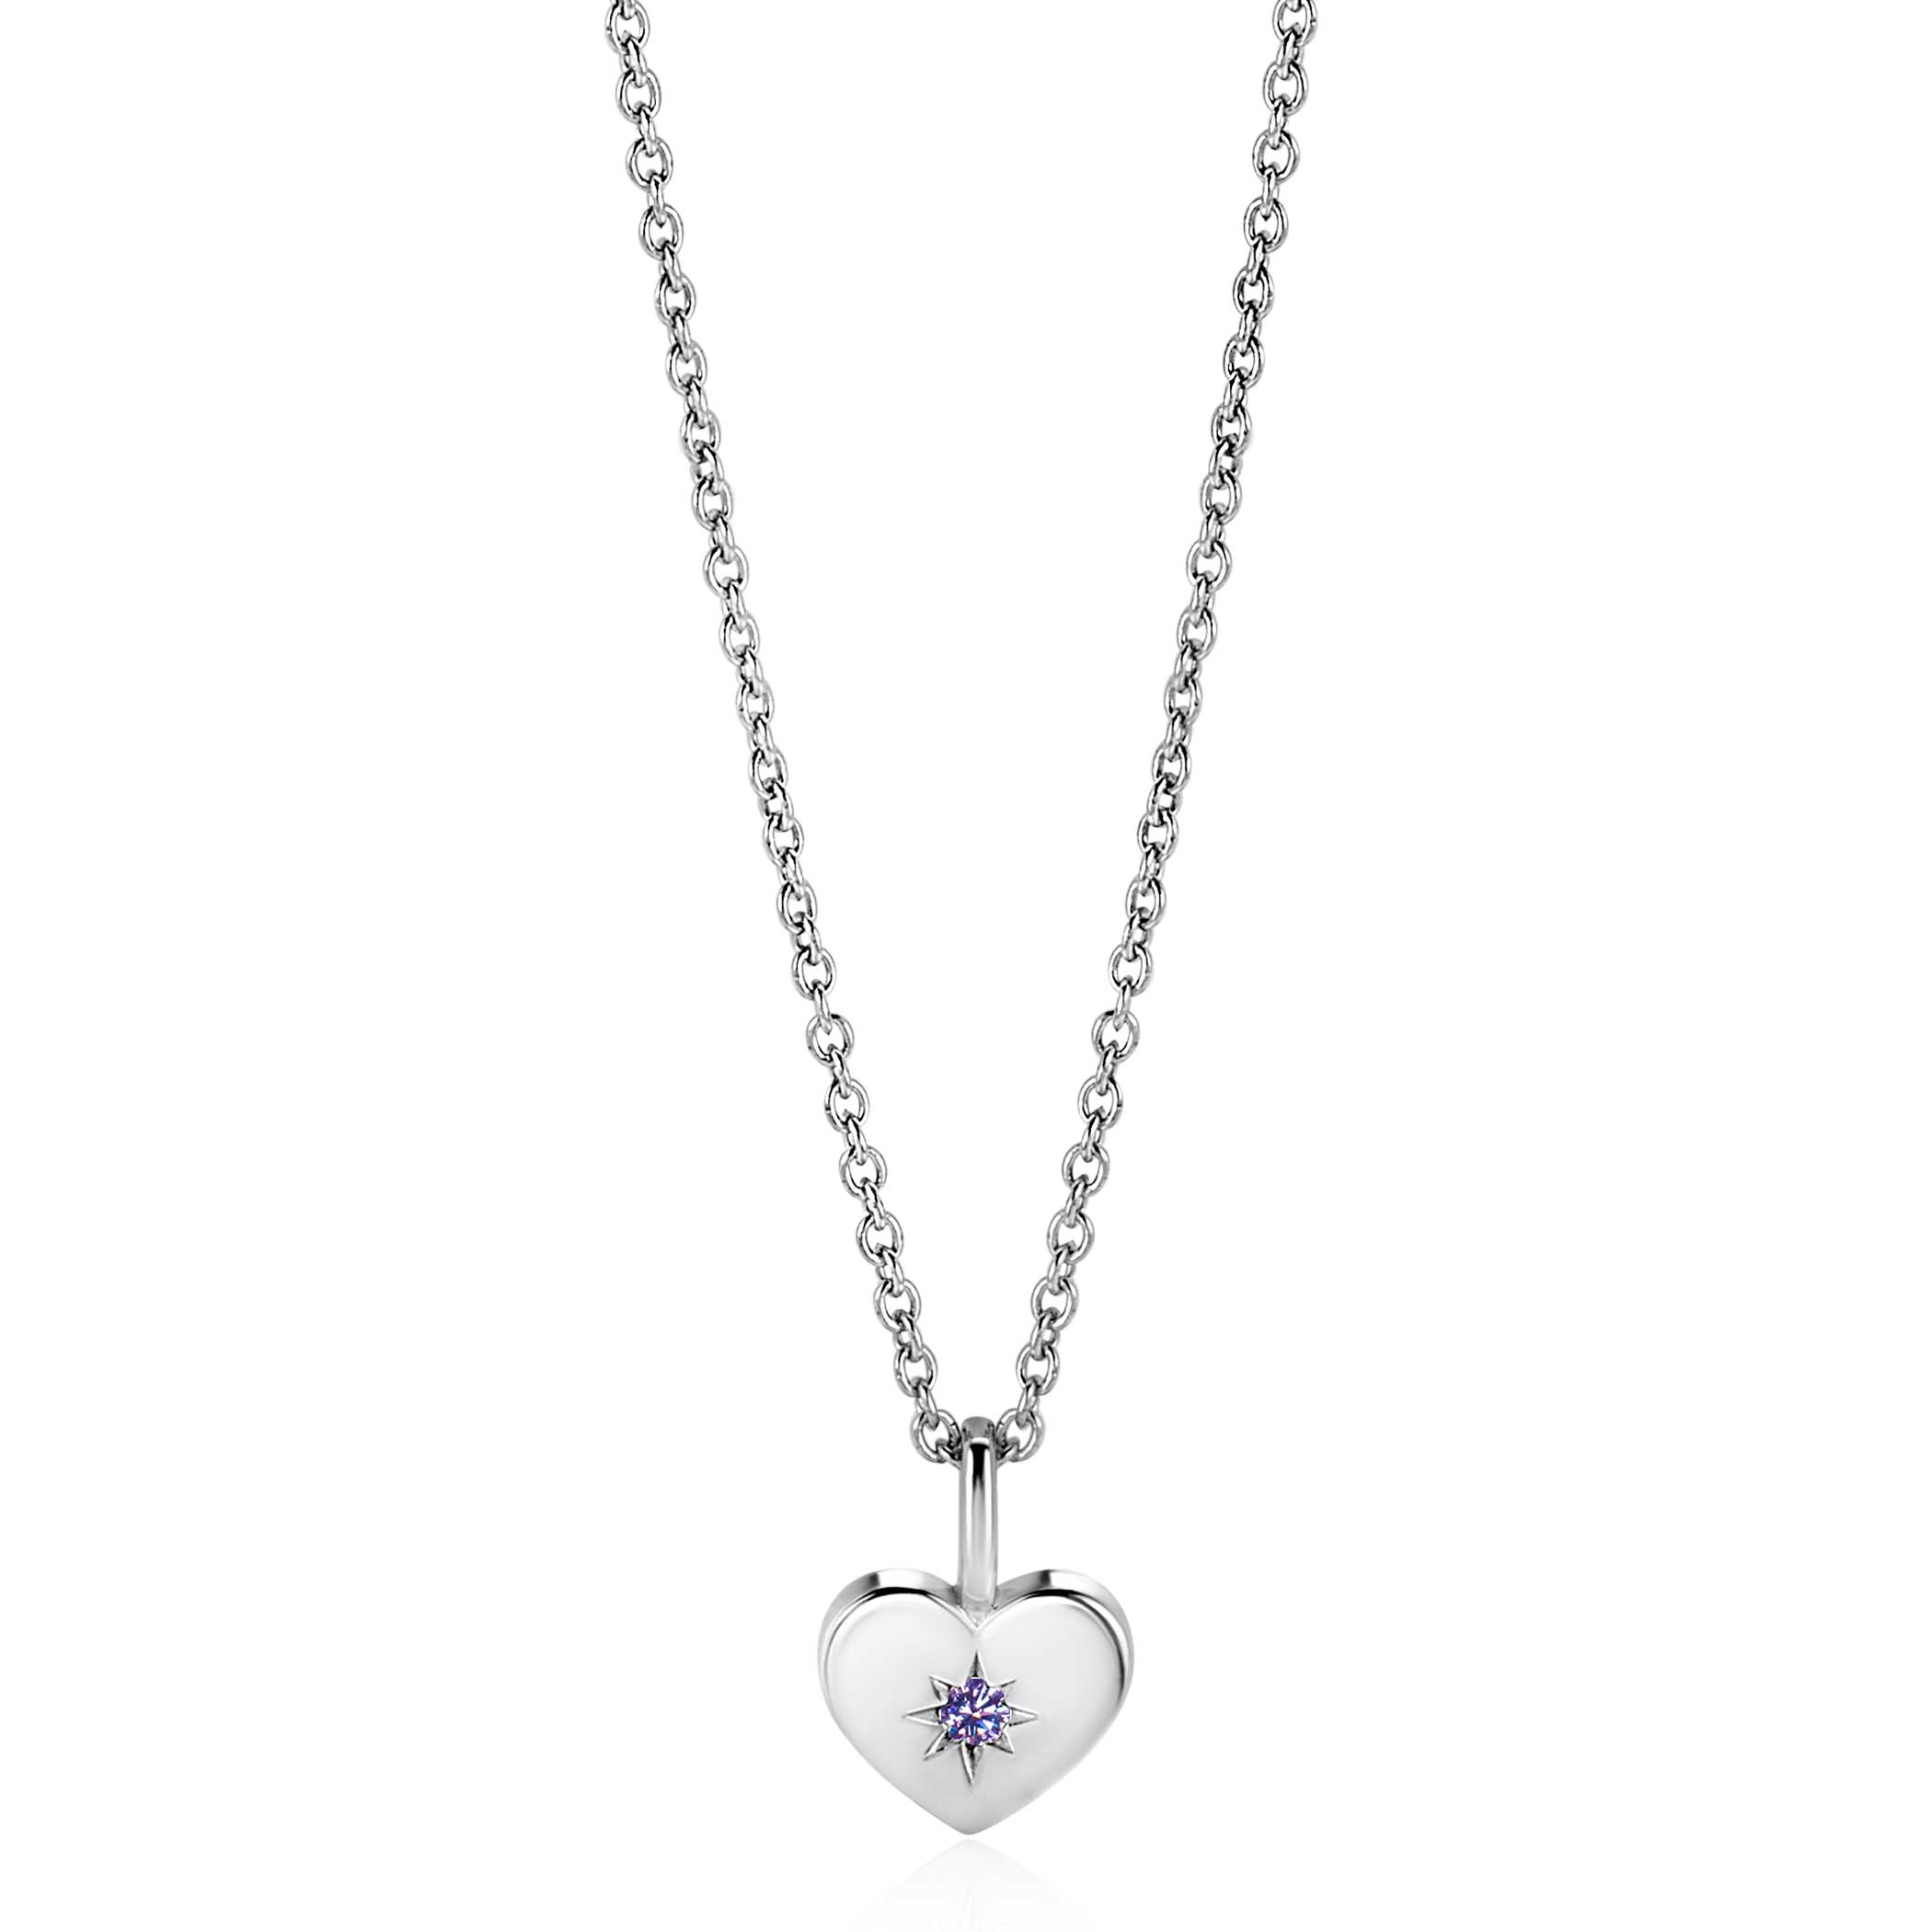 JUNE Pendant 12mm Sterling Silver Heart Birthstone Light Amethyst Zirconia (excl. necklace)